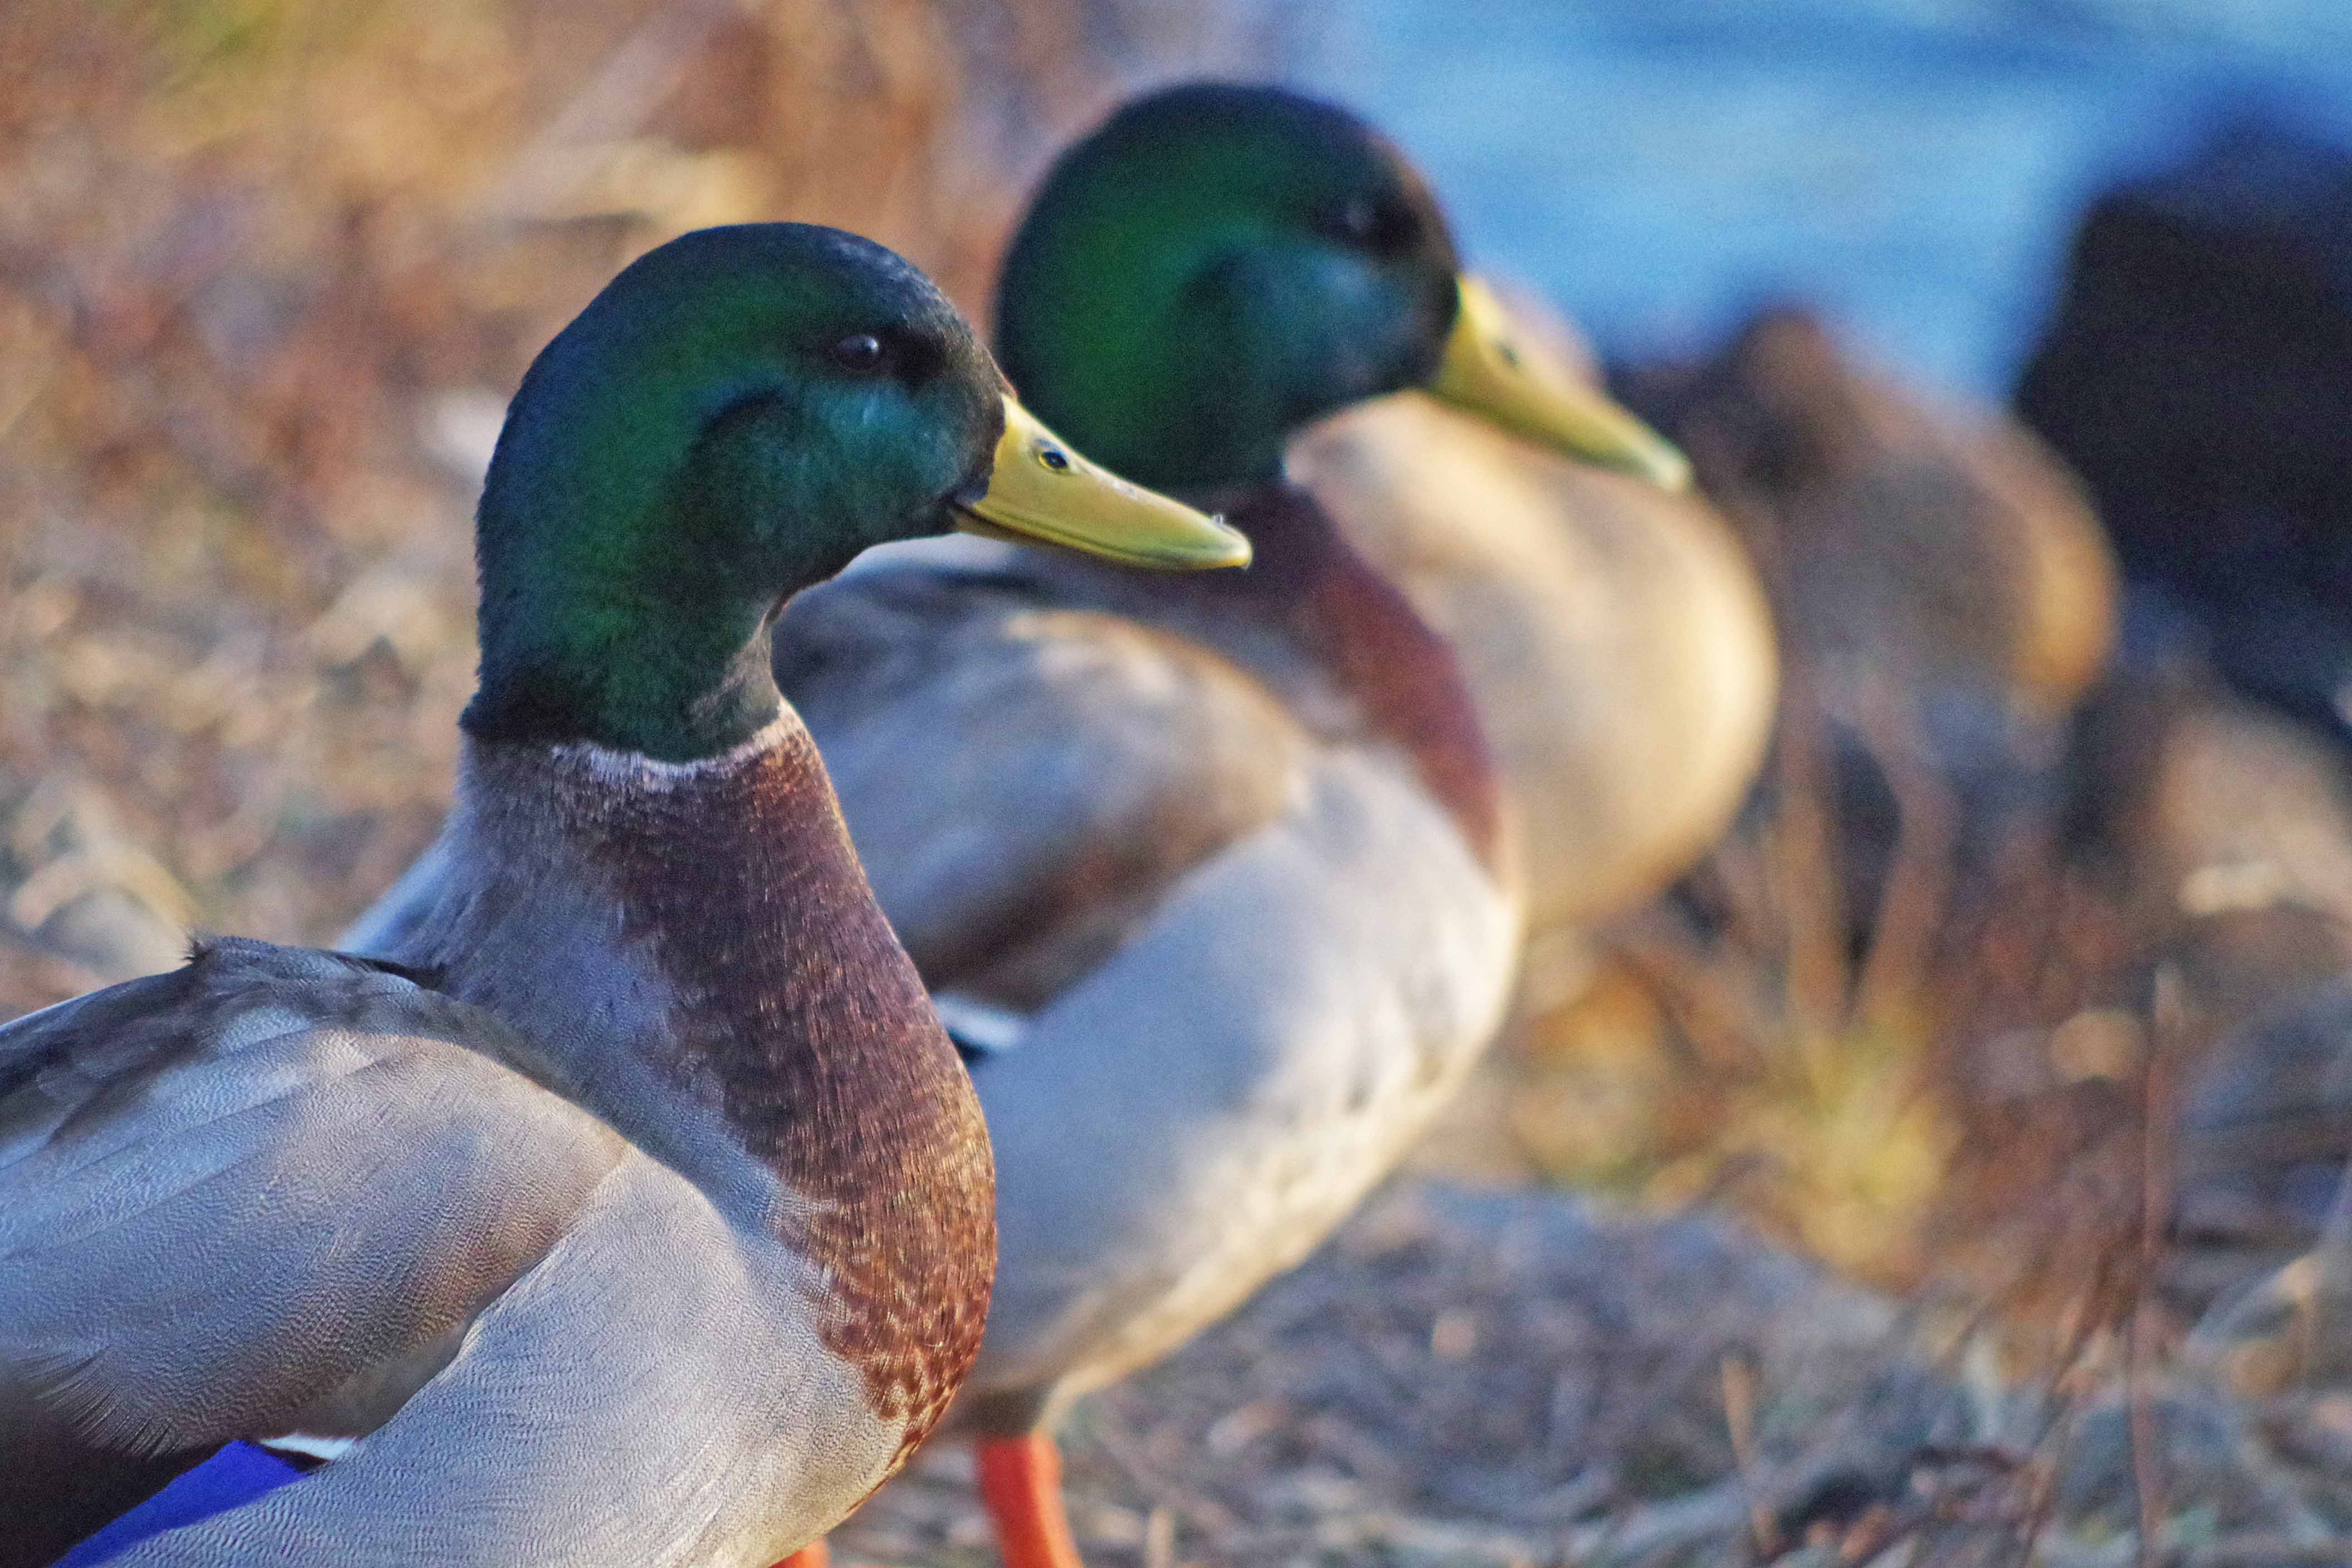 Waterfowl seasons are being established right now.